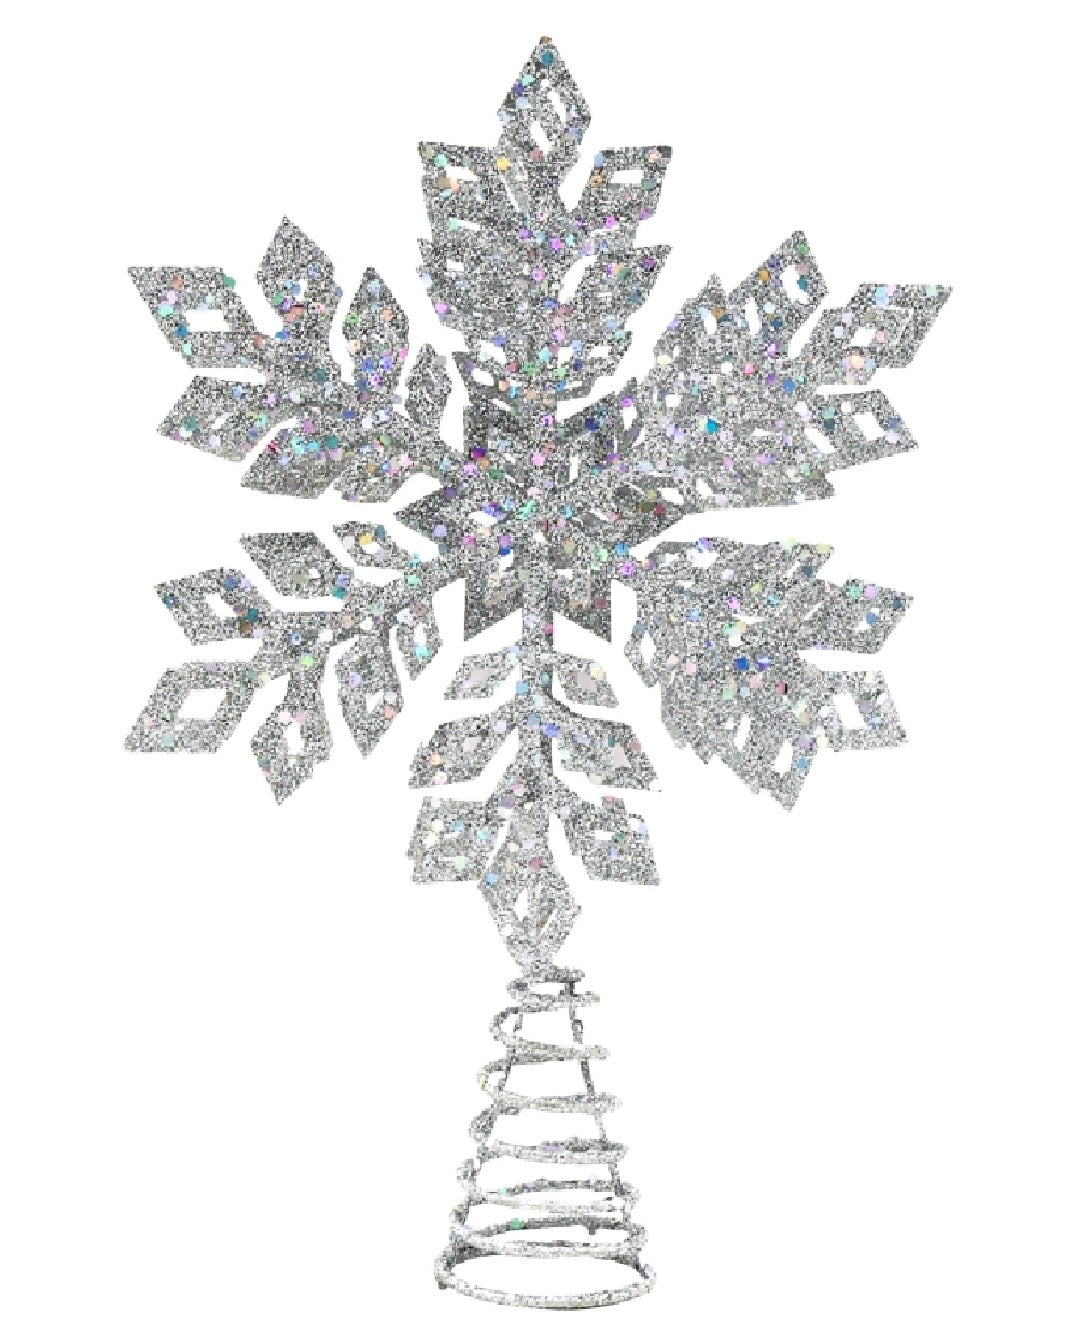 Santas Forest 92607 Christmas Led Tree Topper Star, Silver